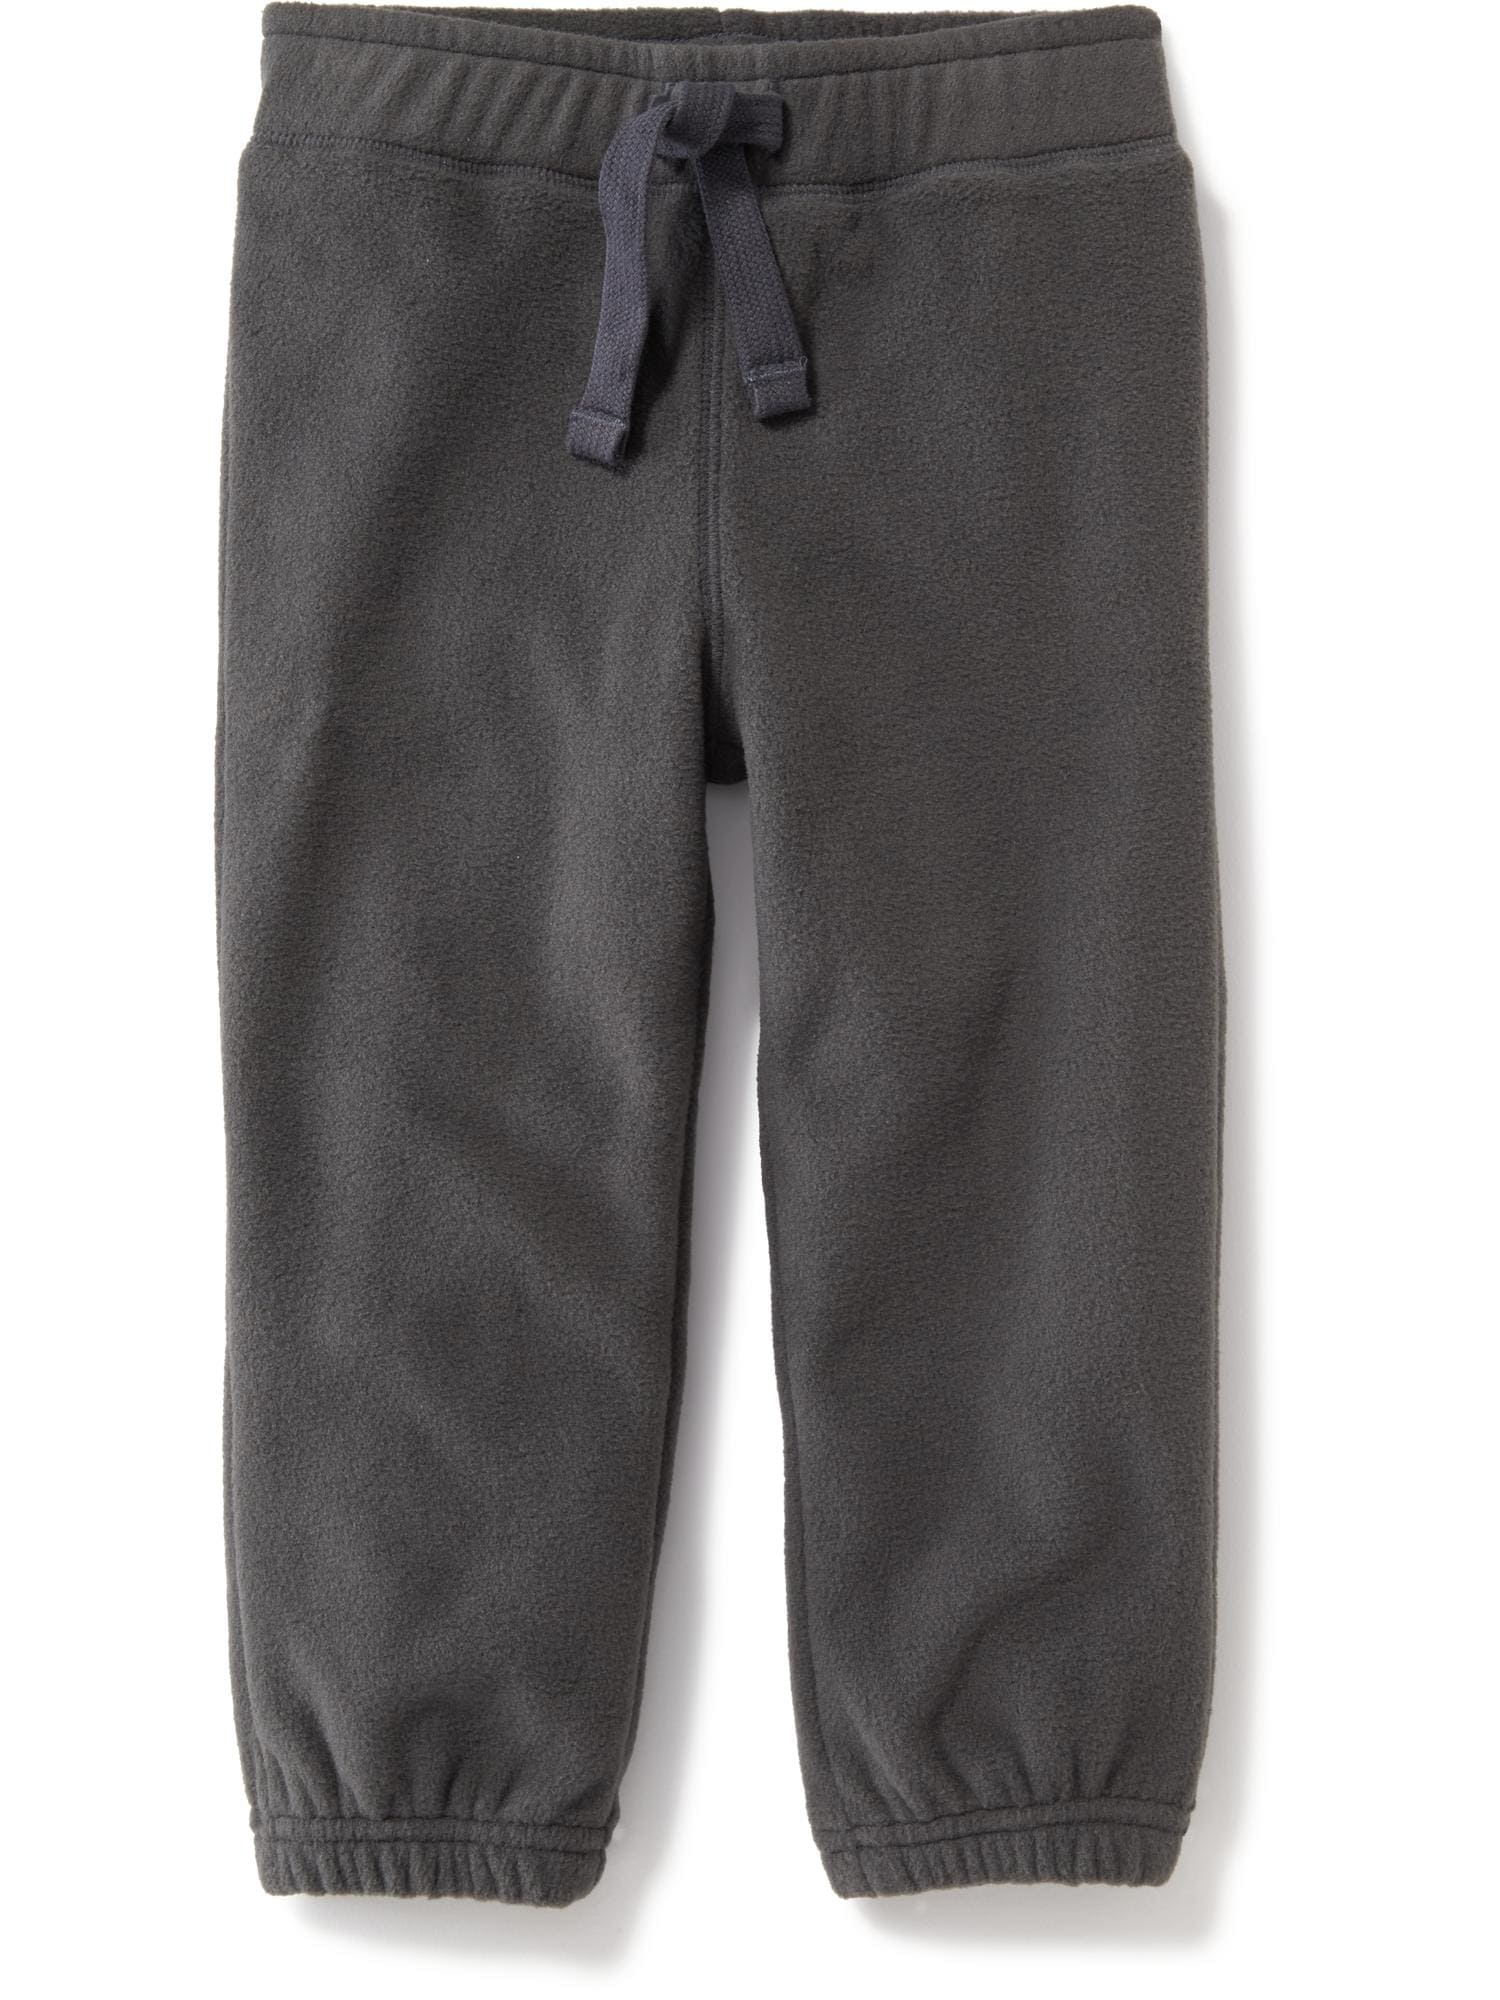 Micro Fleece Pants for Toddler | Old Navy